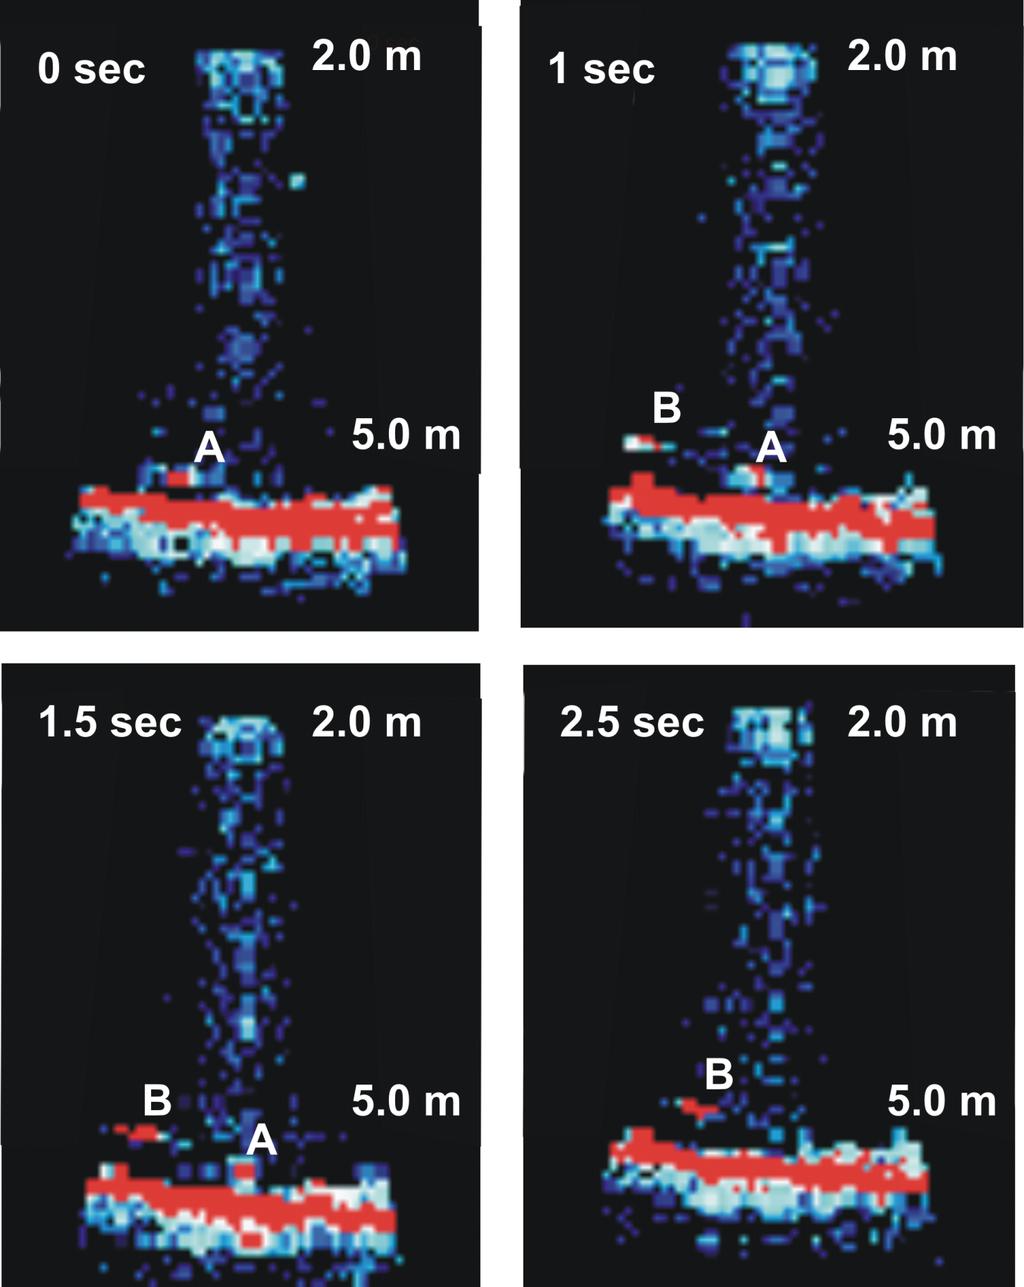 Figure 4. Imaging of fish near seafloor with acoustic lens.